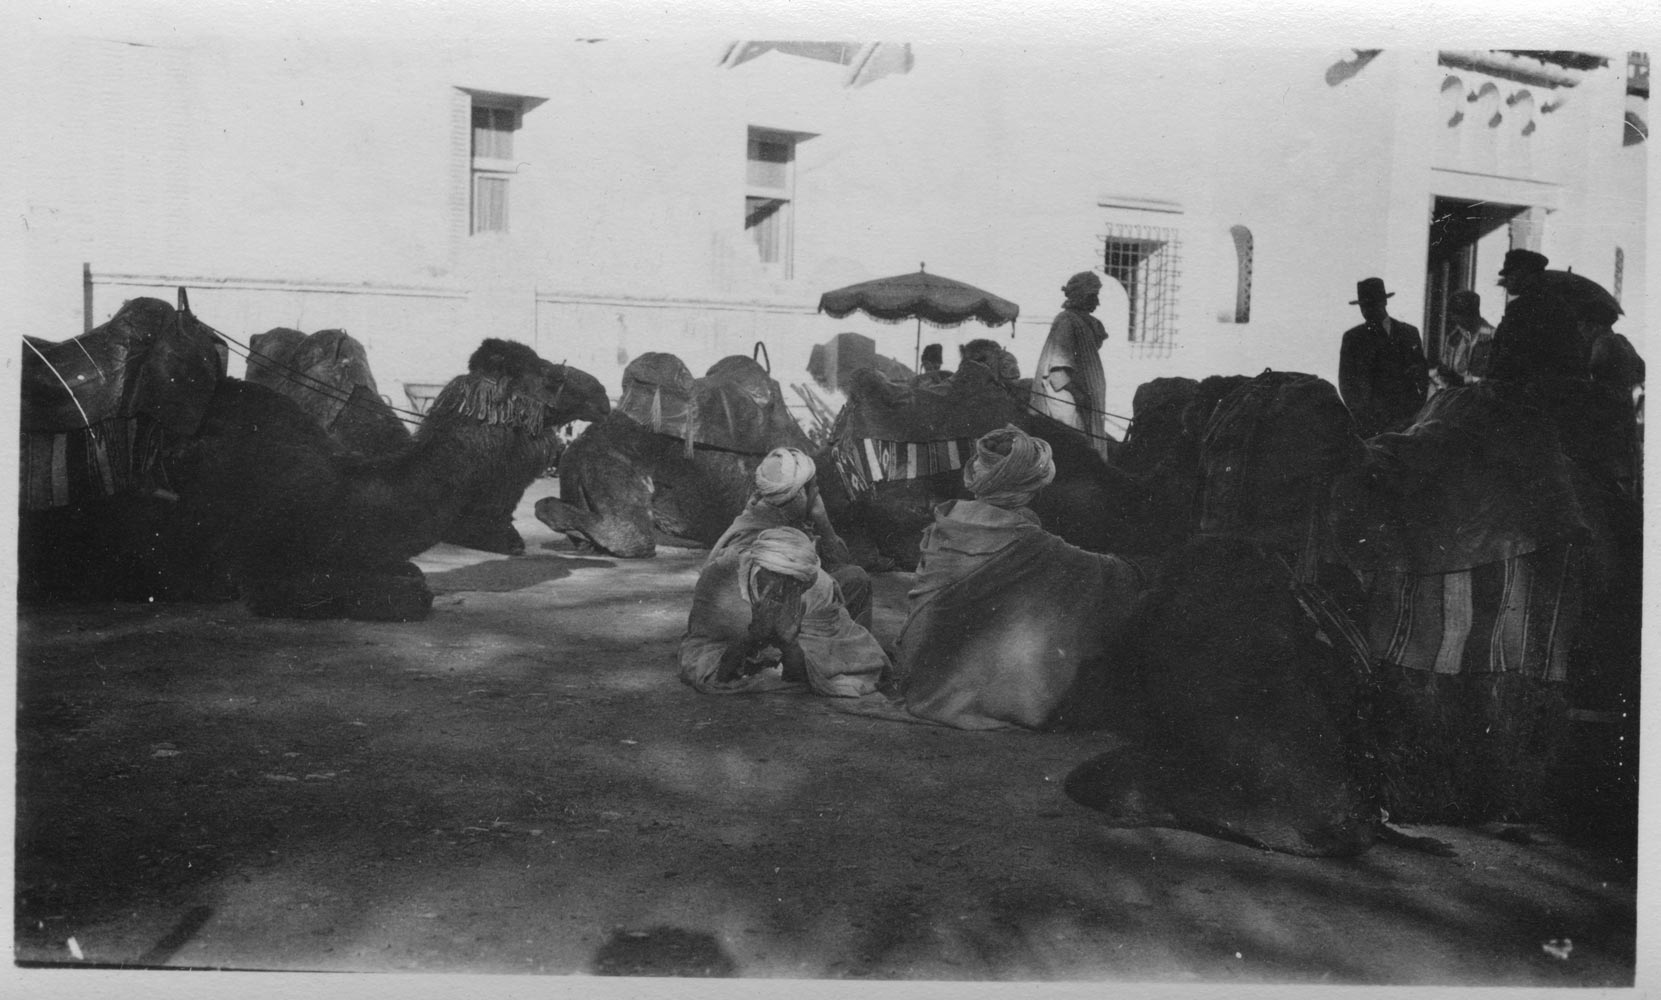 View of camels in the courtyard of the Transatlantique Hotel, Biskra